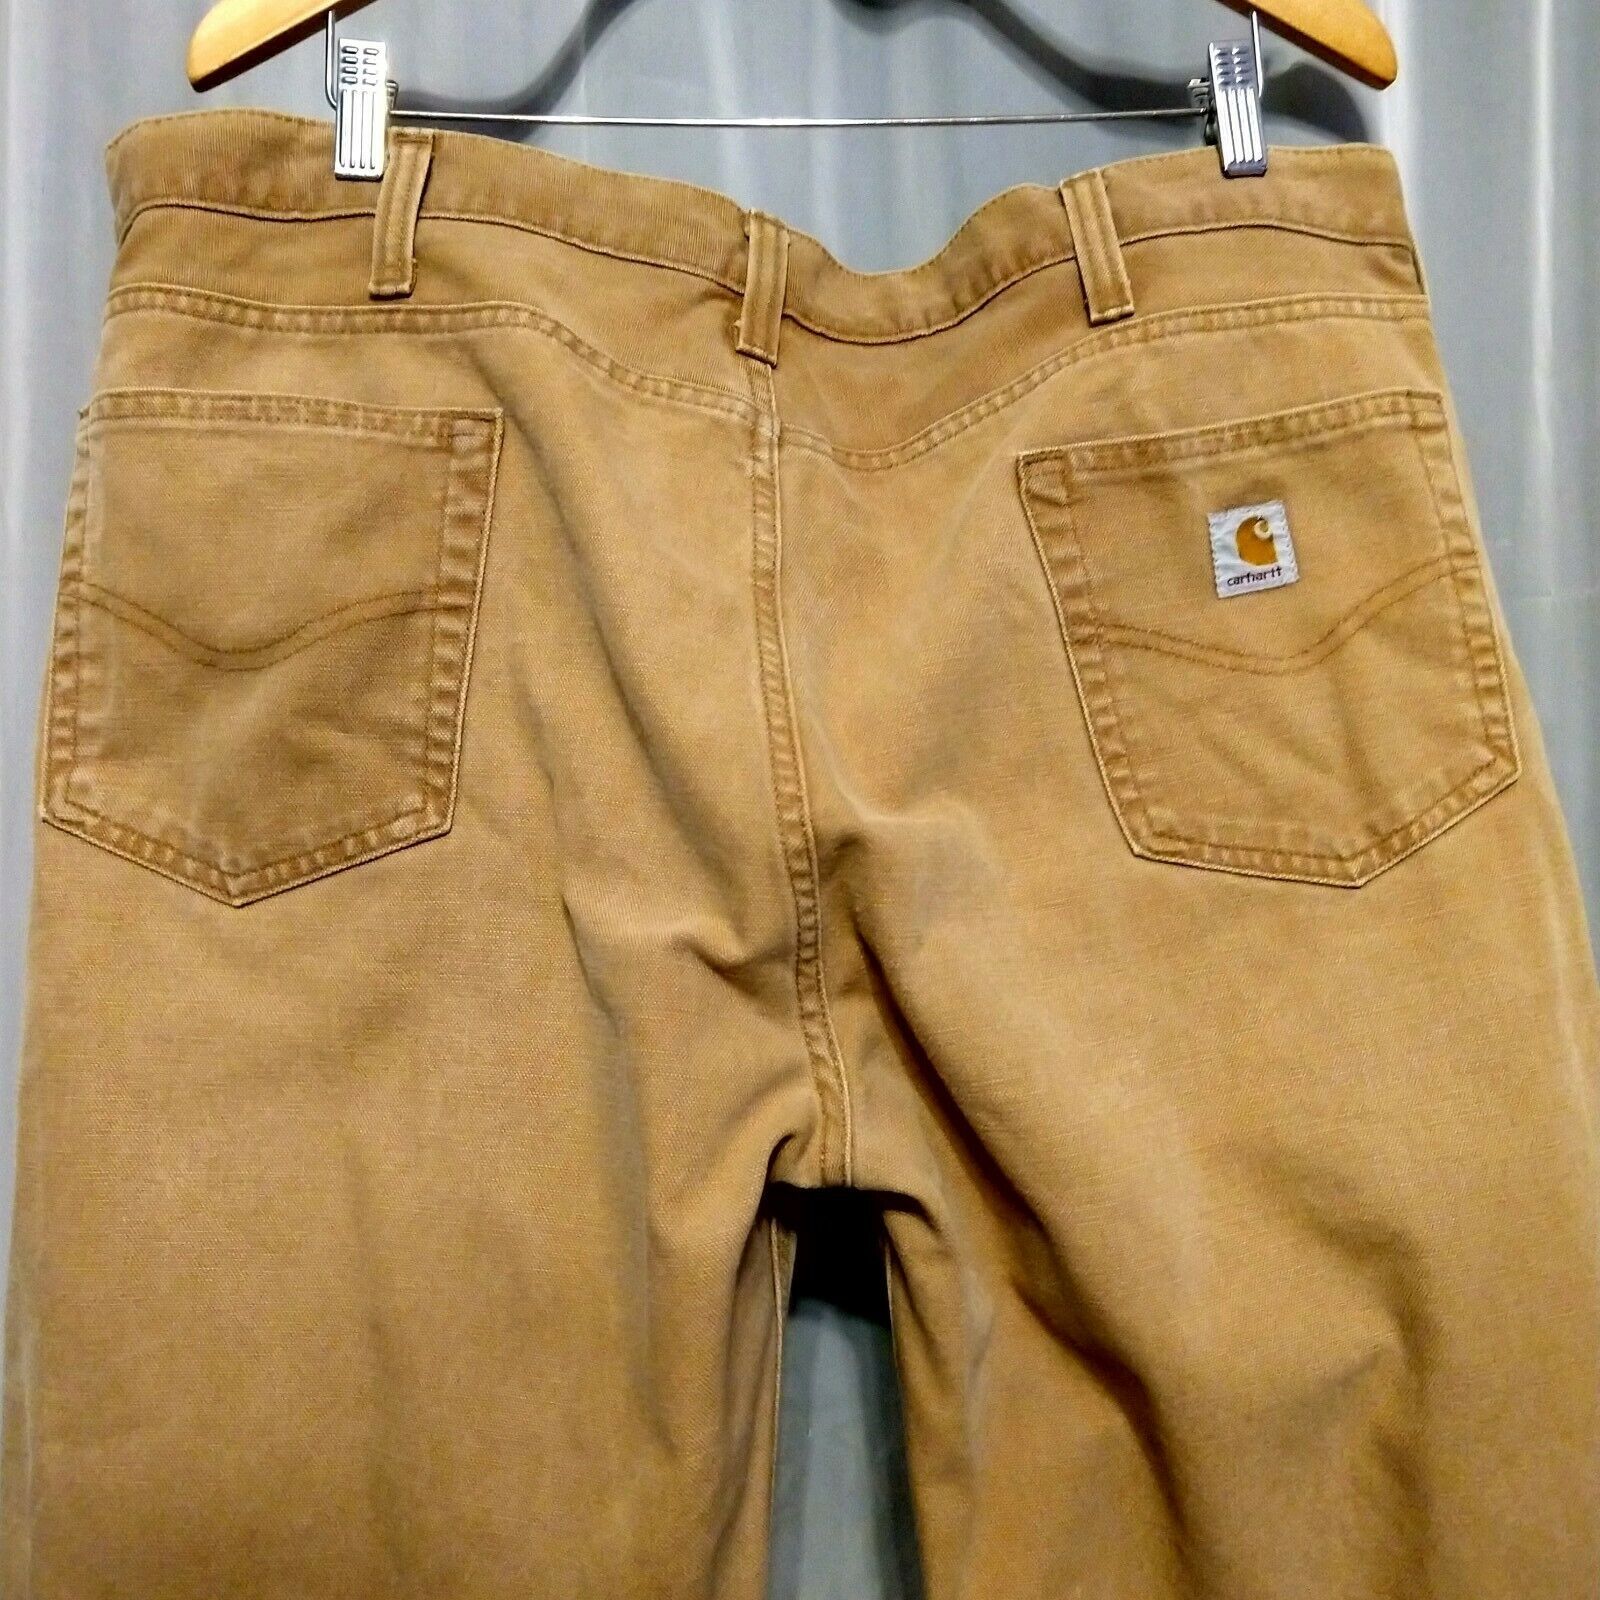 Carhartt Sturdy Jeans Pants 14806 Relaxed Fit Tan 100 Cotton Sz 40 X